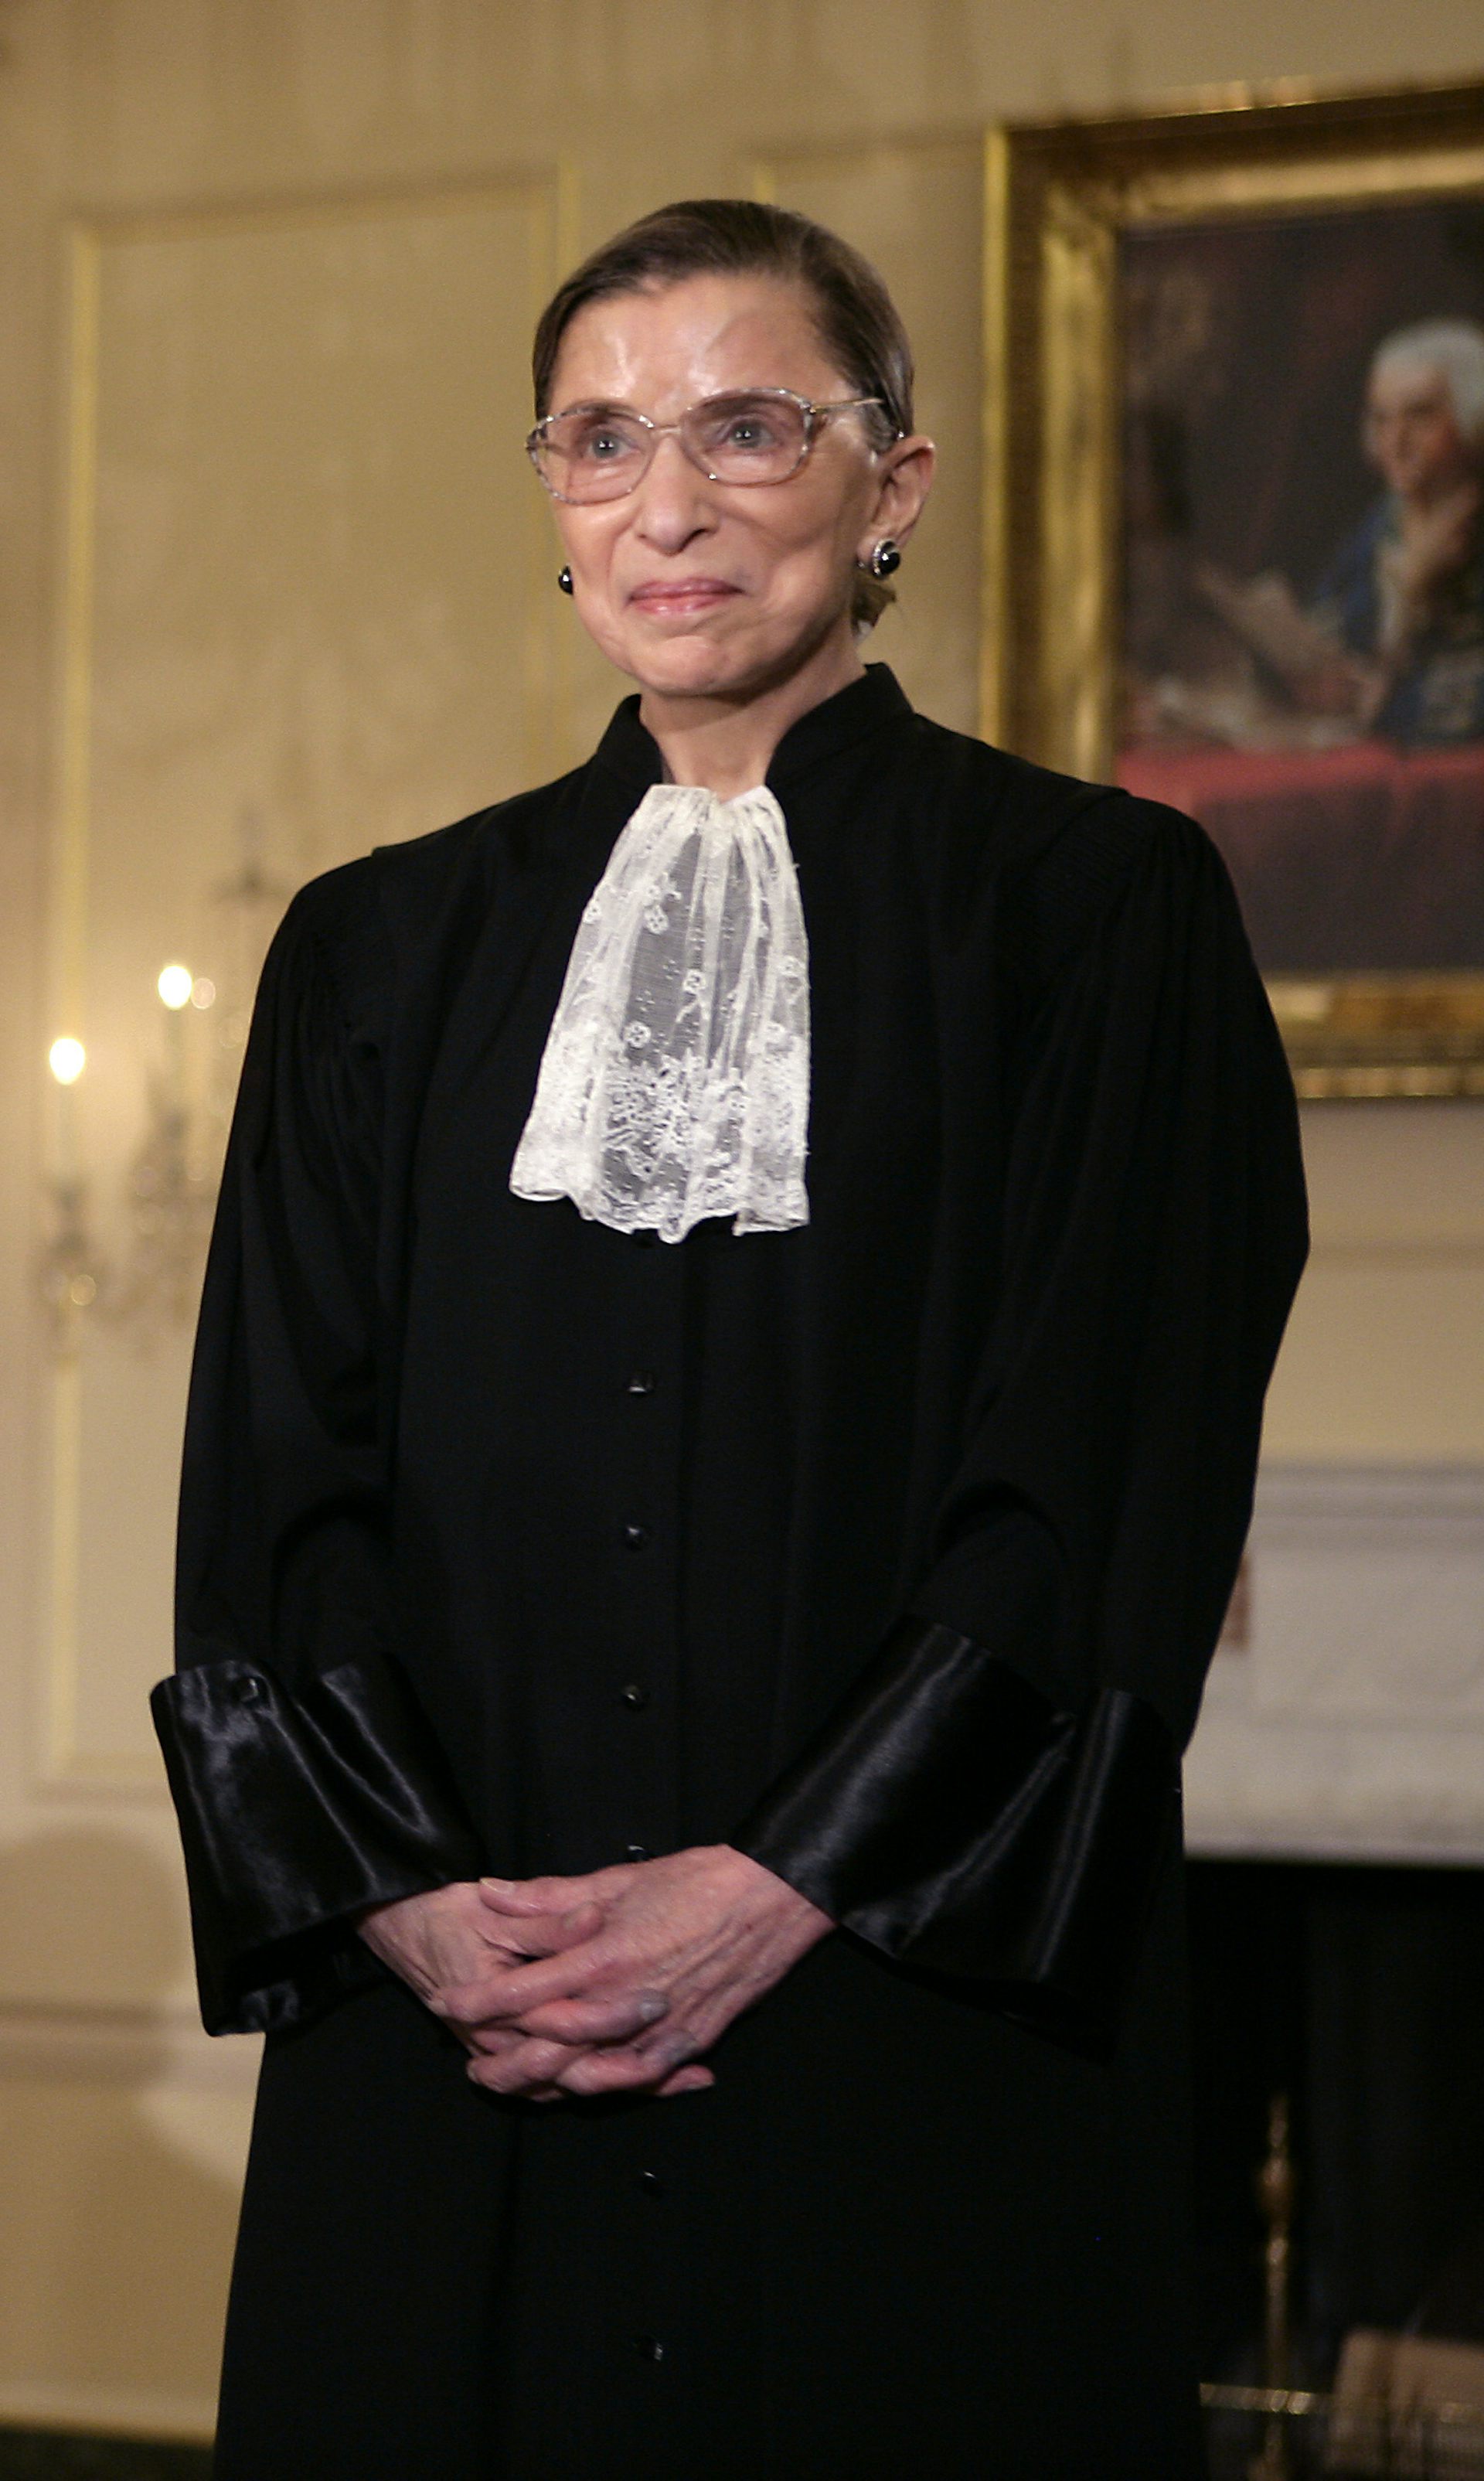 Supreme Court Justice Ruth Bader Ginsburg in 2005.